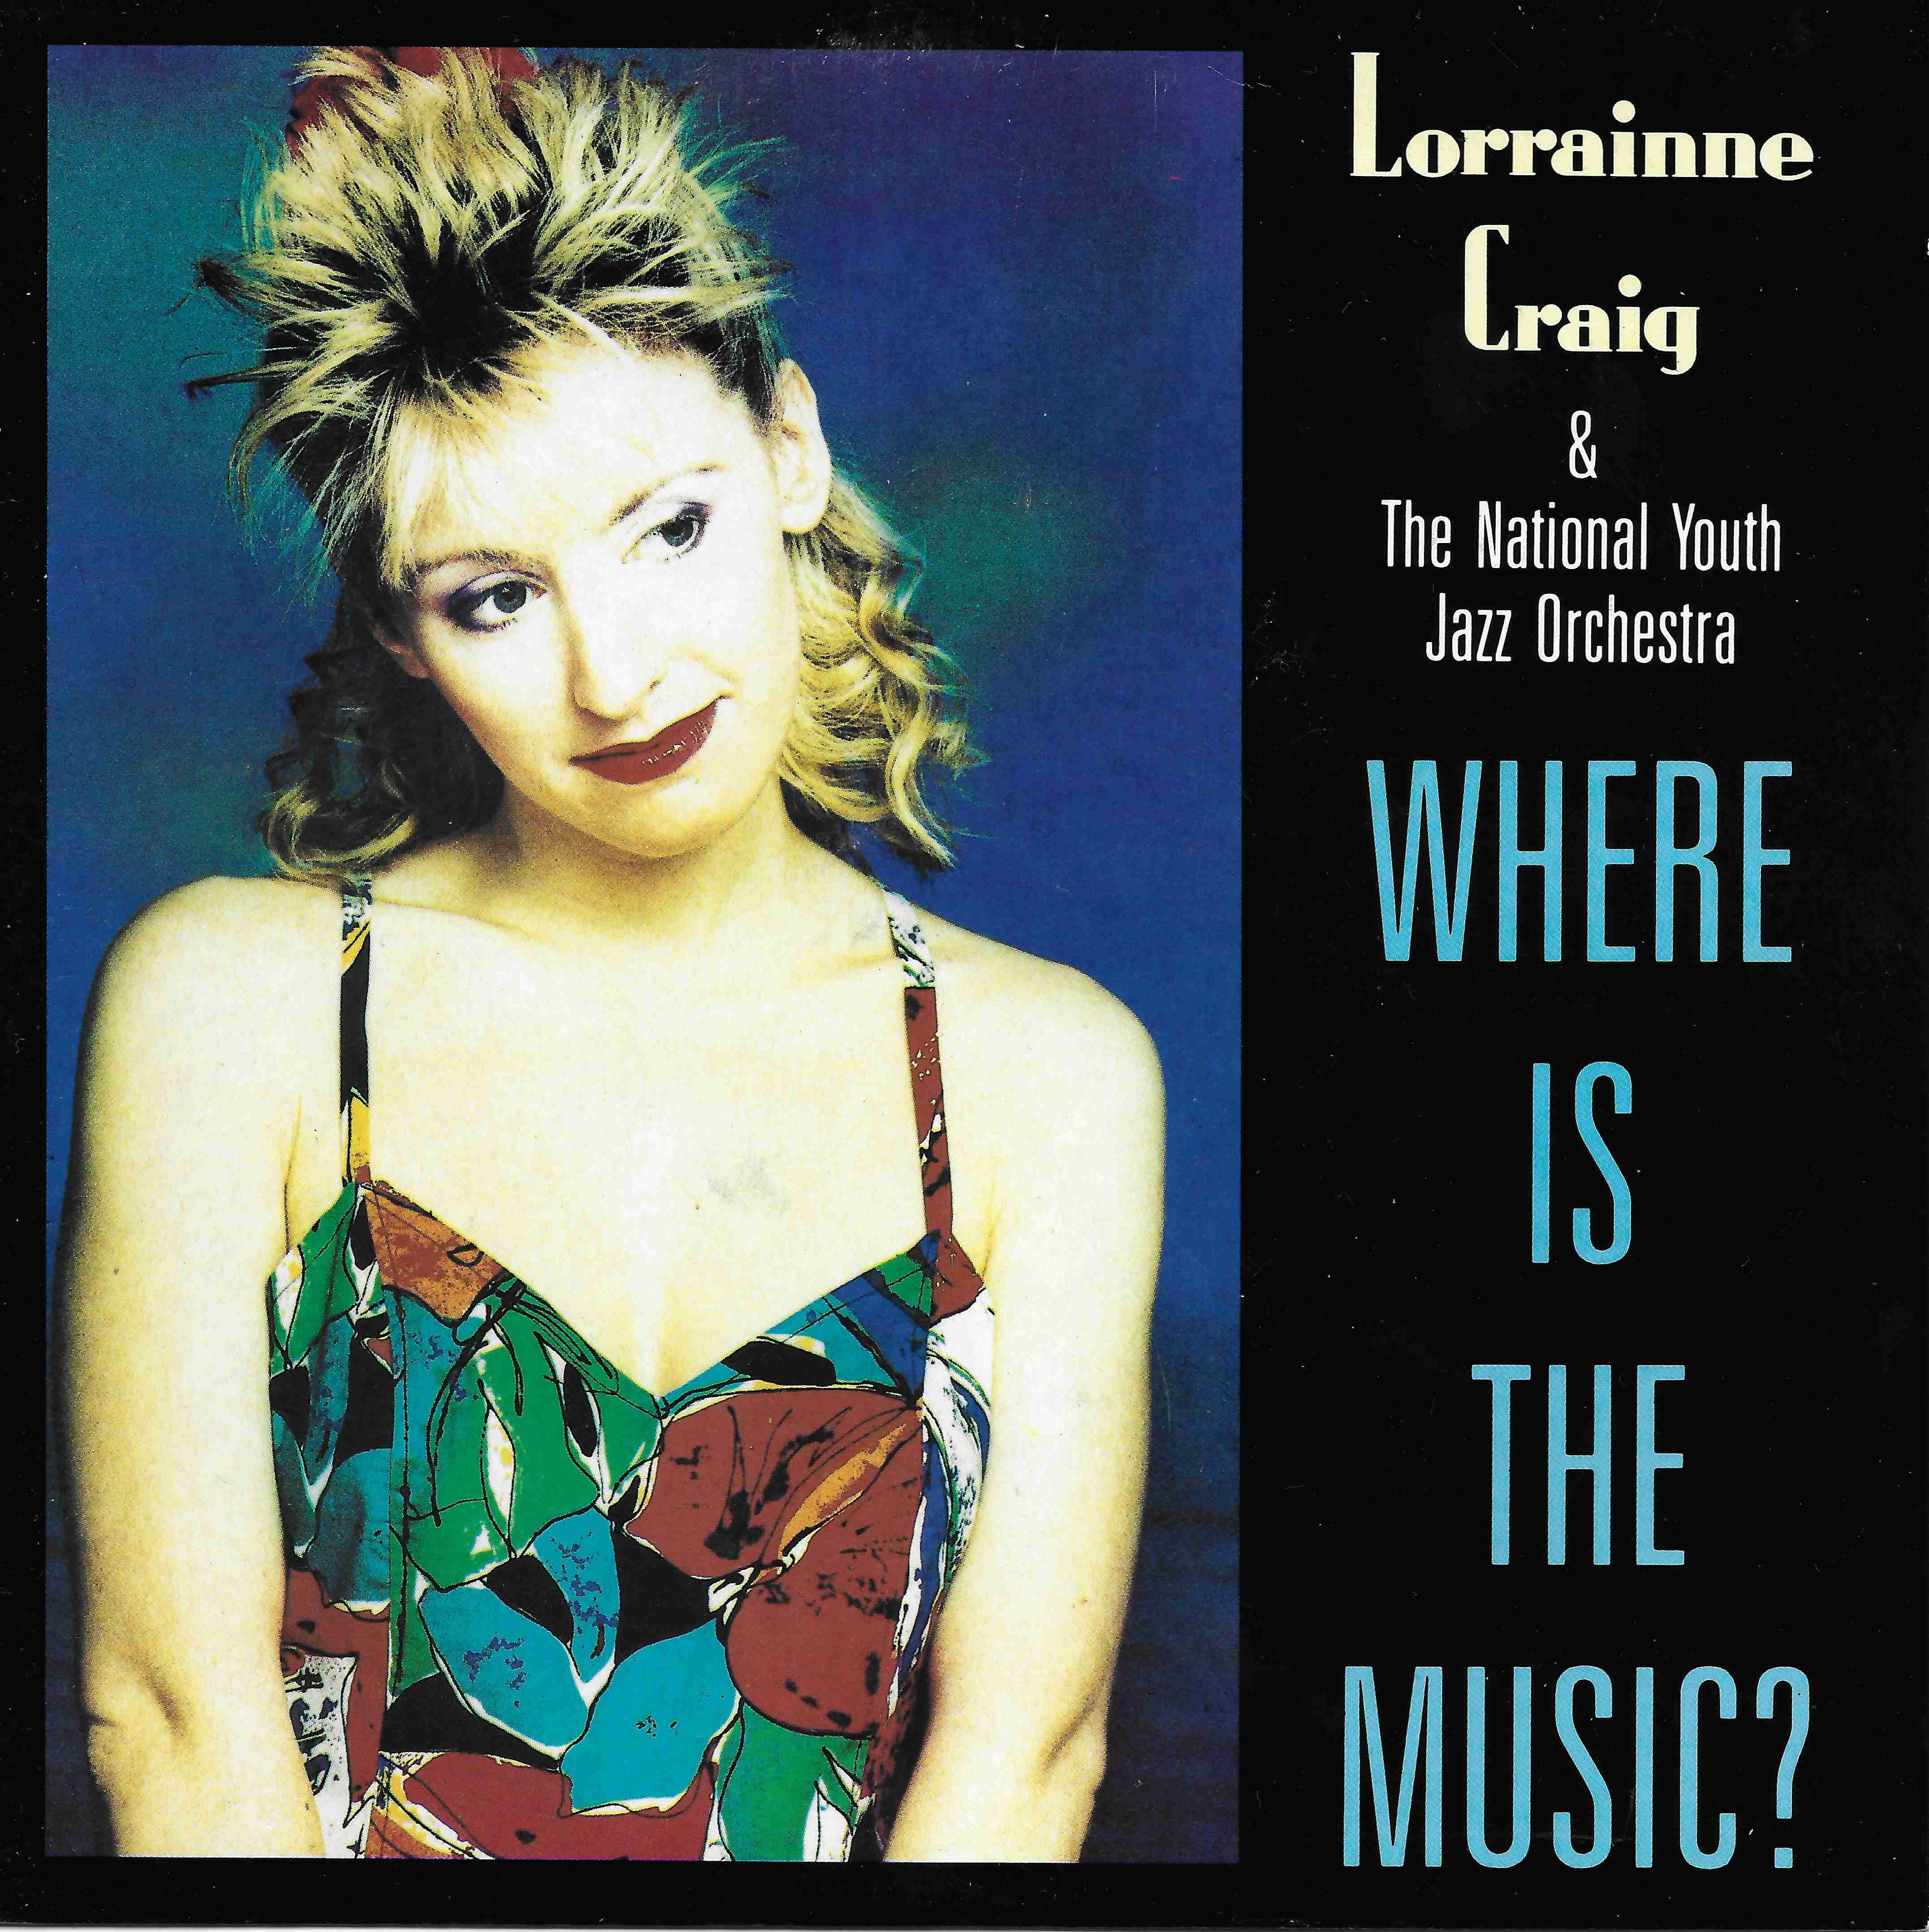 Picture of Where is the music ? (Shades of blue and green) by artist Lorraine Craig & The National Youth Jazz Orchestra from the BBC singles - Records and Tapes library